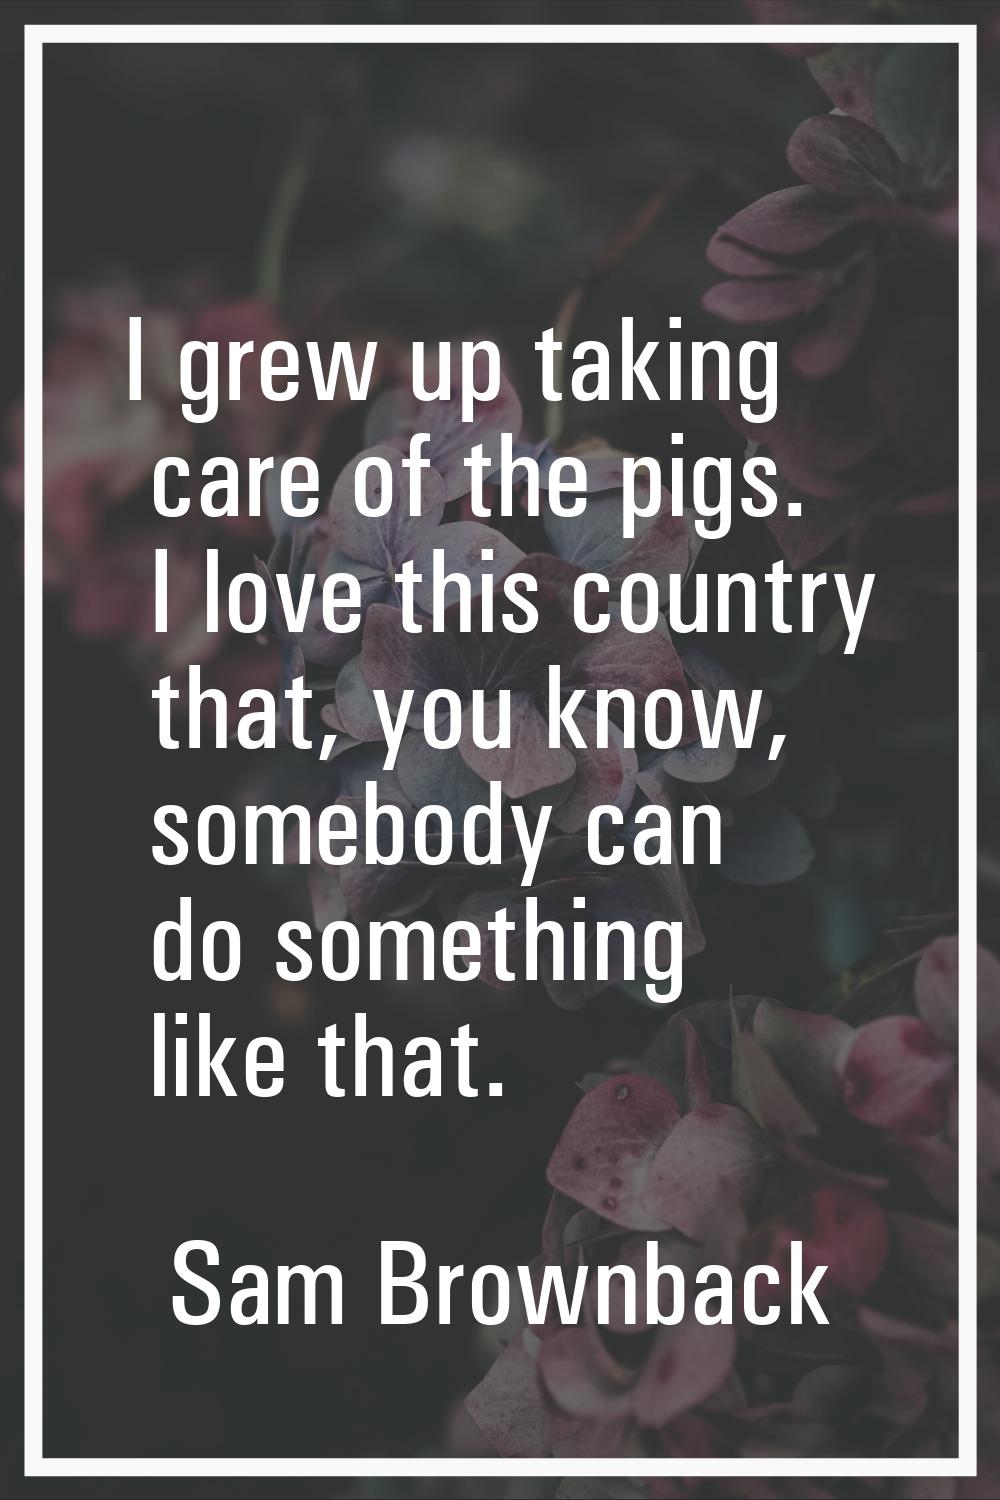 I grew up taking care of the pigs. I love this country that, you know, somebody can do something li